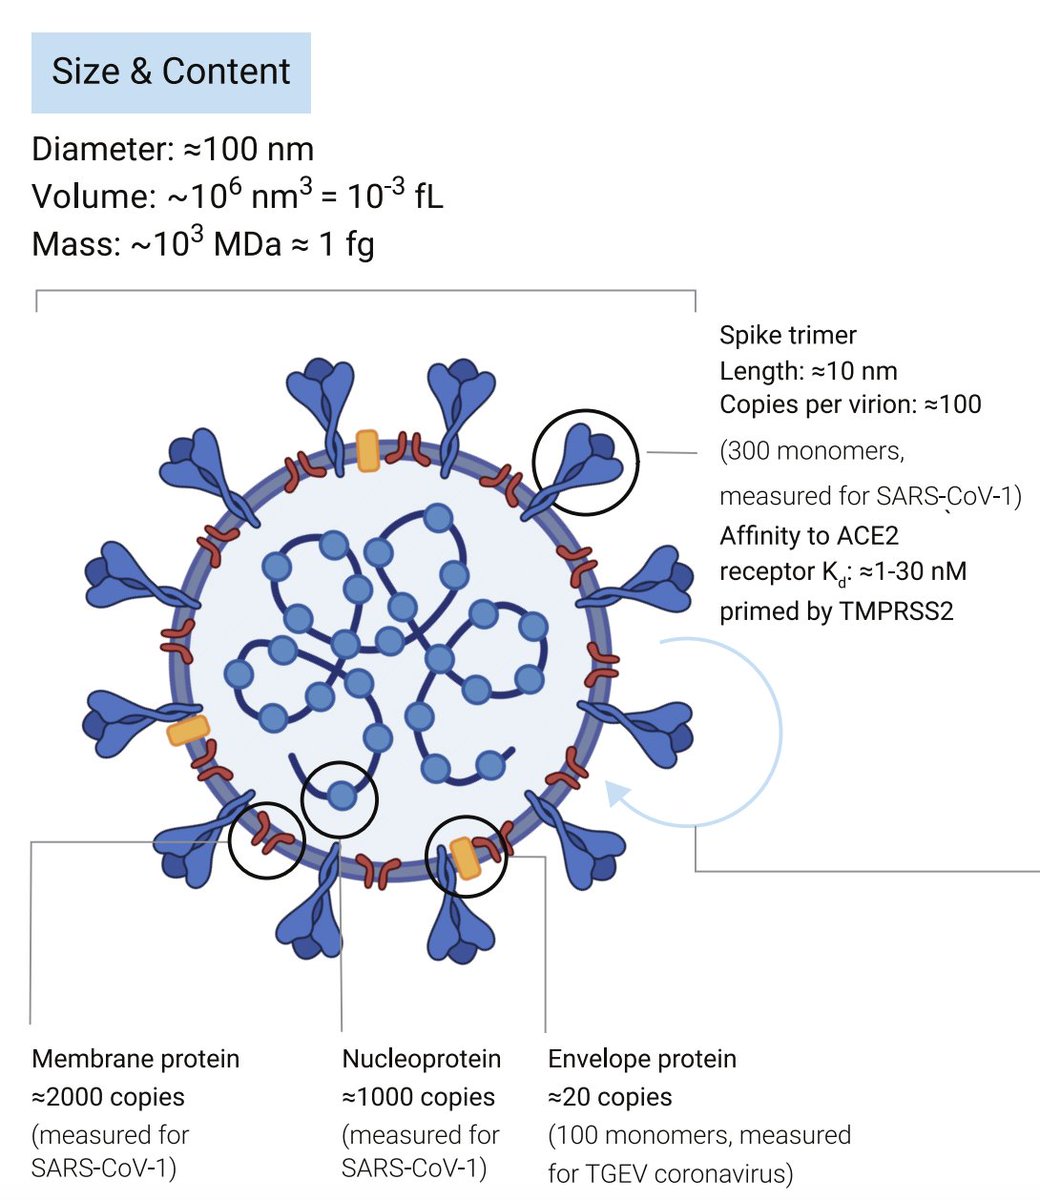 The viral particle is ≈100 nm in diameter and has a membrane envelope derived from host cell lipids. The most abundant structural proteins are a nucleoprotein (1000 copies) that packages the genome and a "spike" protein (300 monomers) that binds the human cell receptor ACE2.